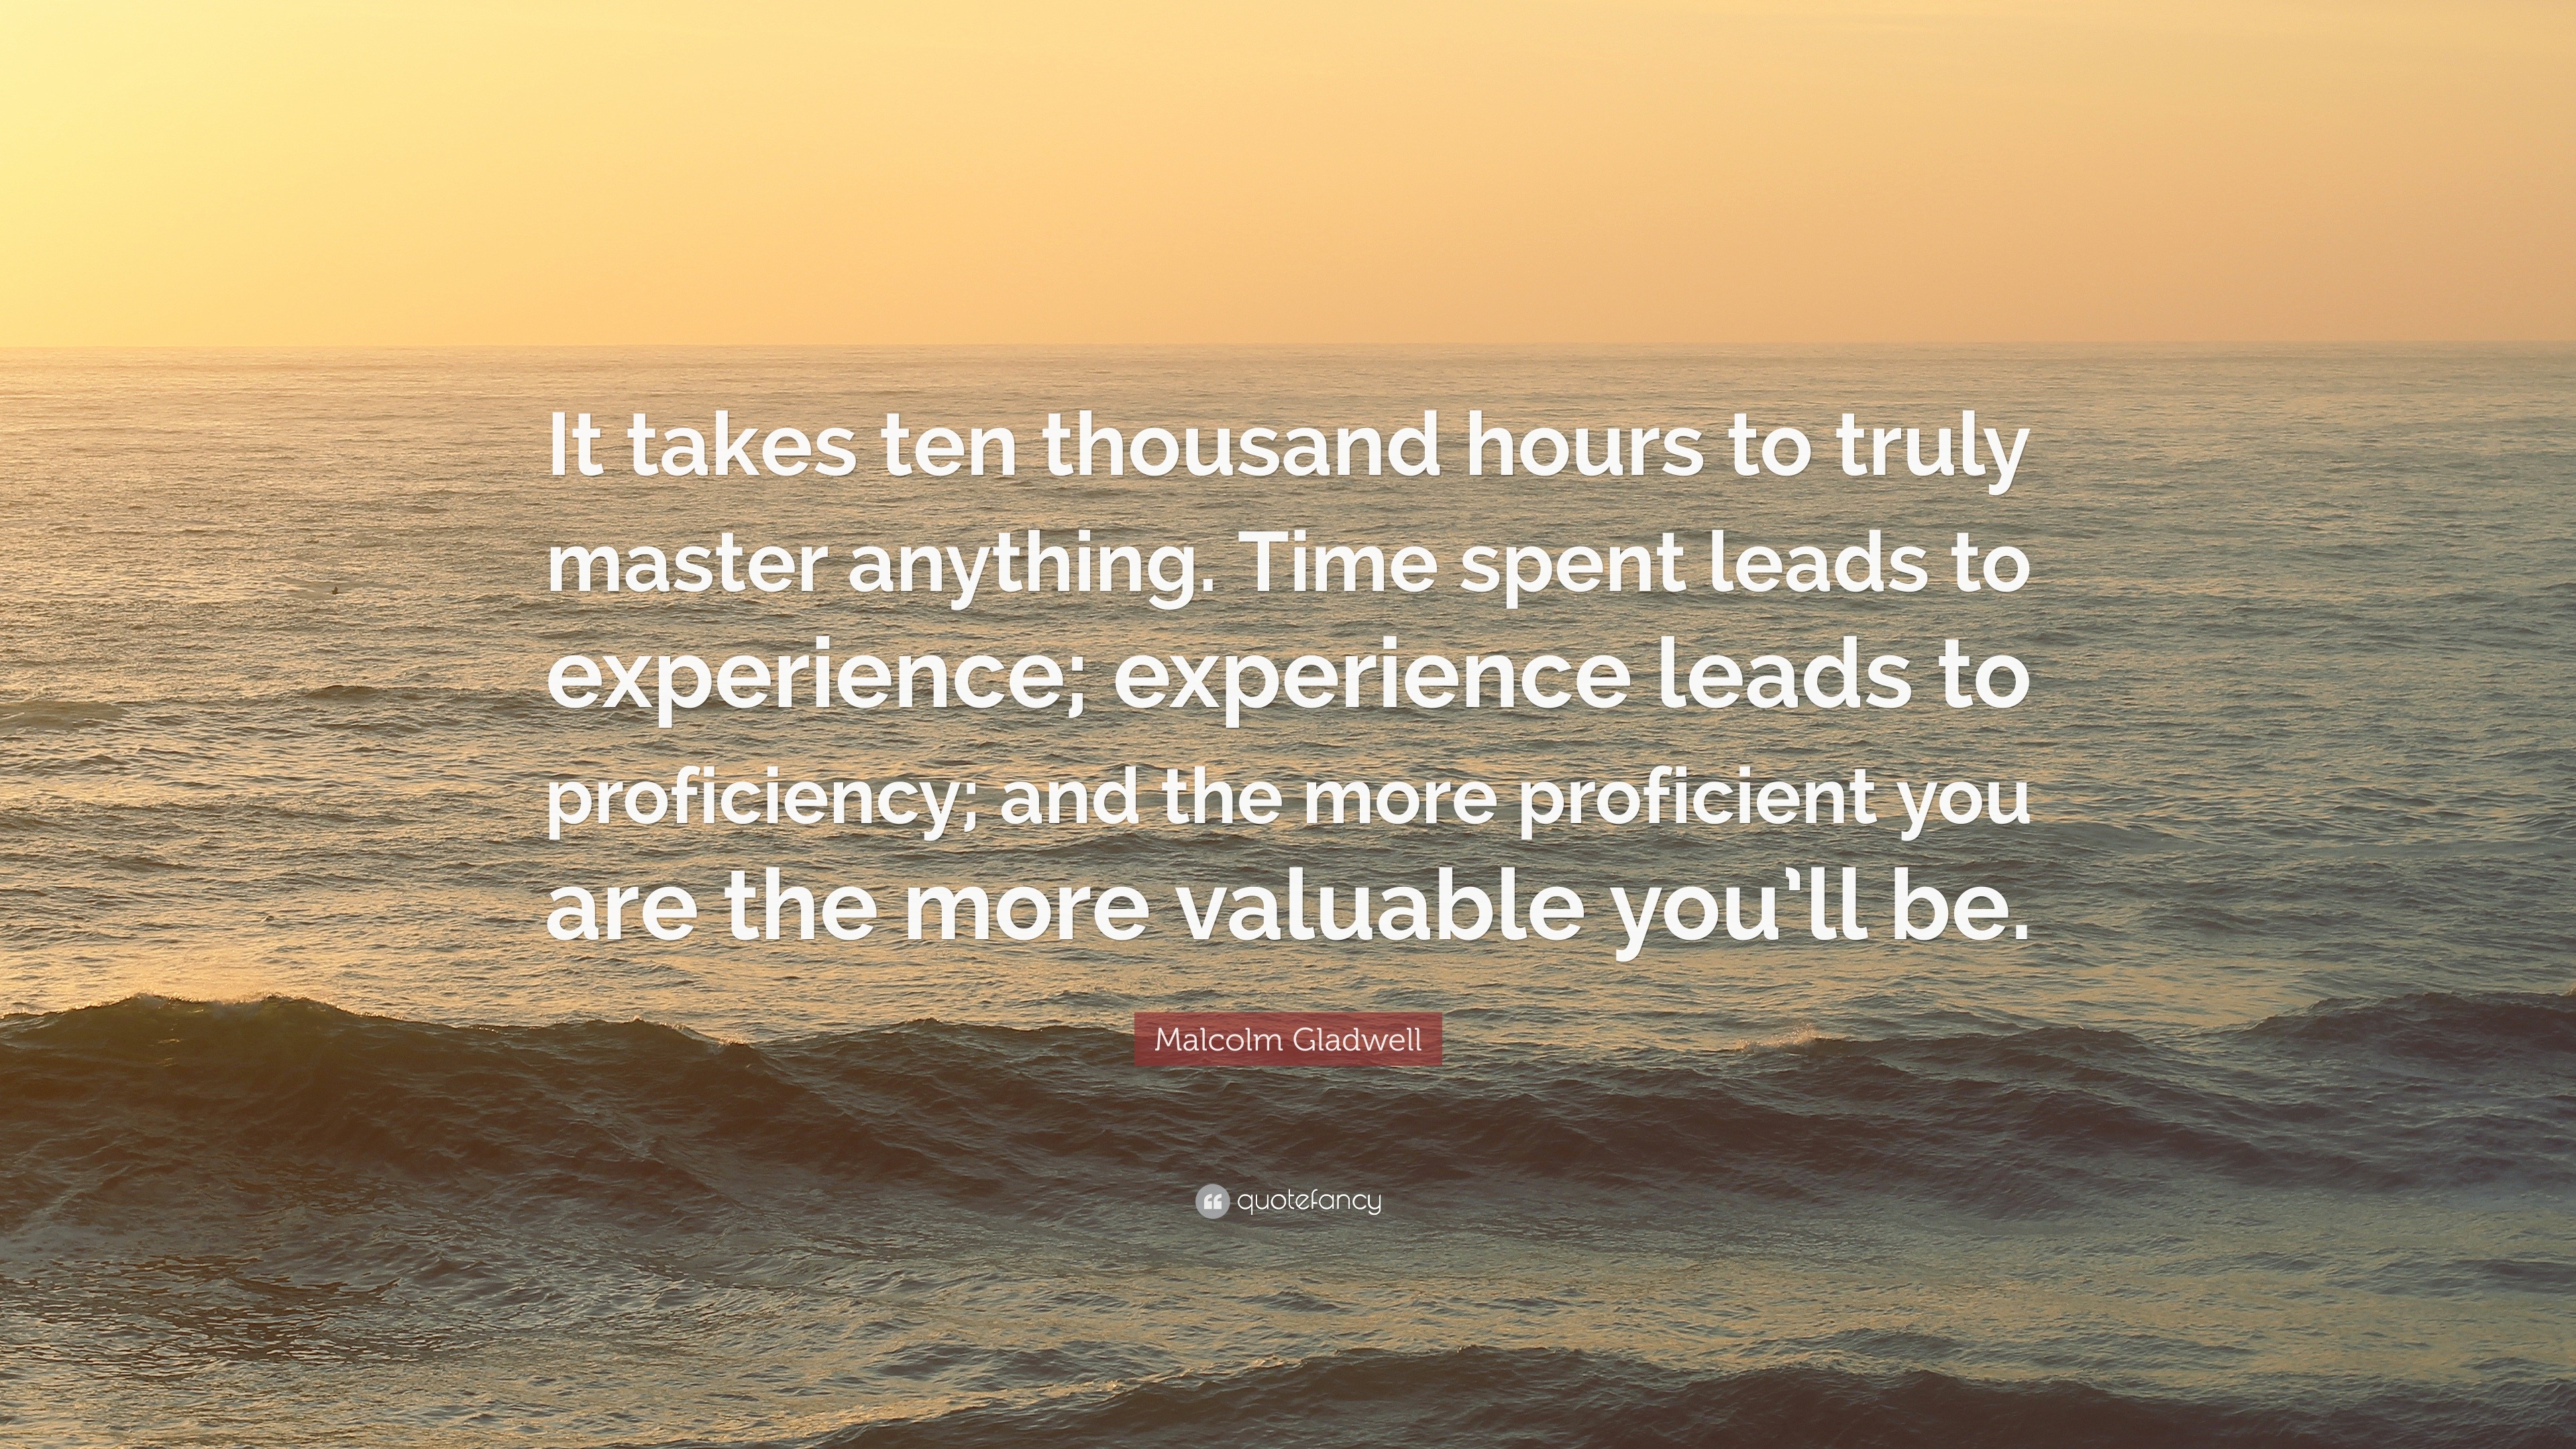 Malcolm Gladwell Quote: "It takes ten thousand hours to ...